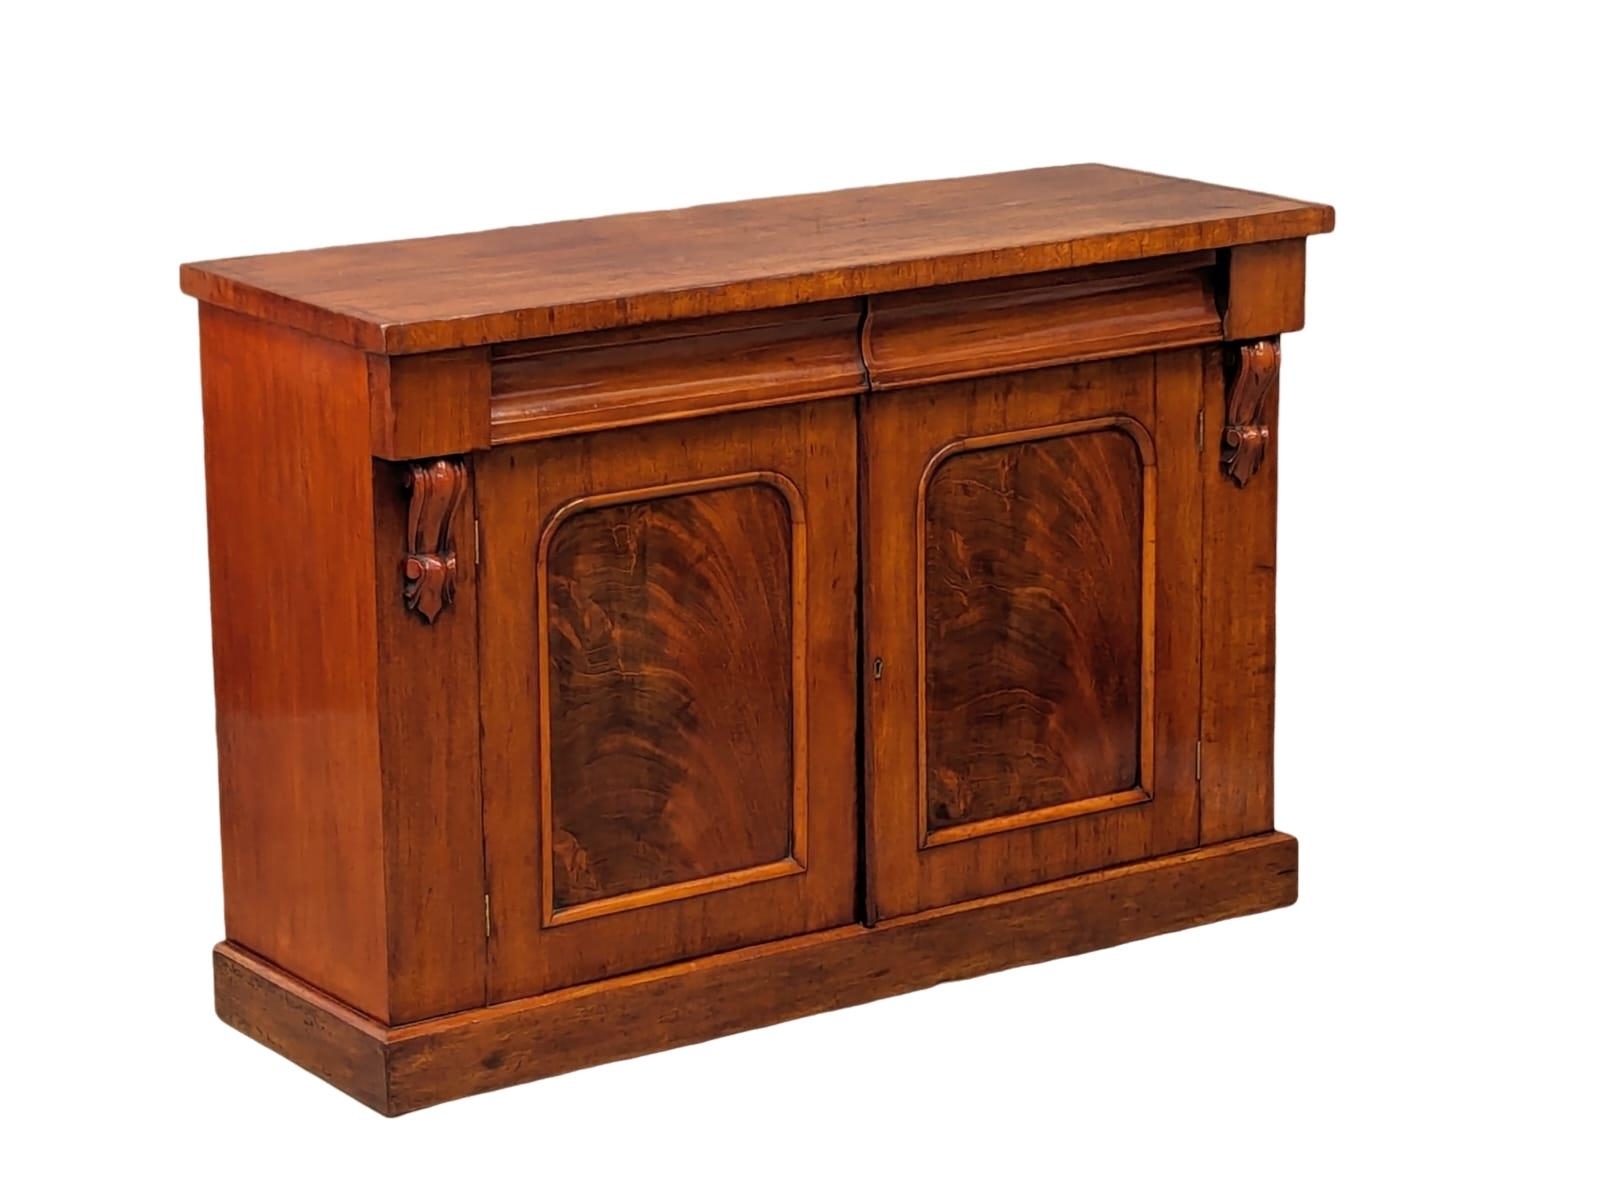 A Victorian mahogany side cabinet with fitted cellarette and 2 drawers. 121.5x43.5x83.5cm